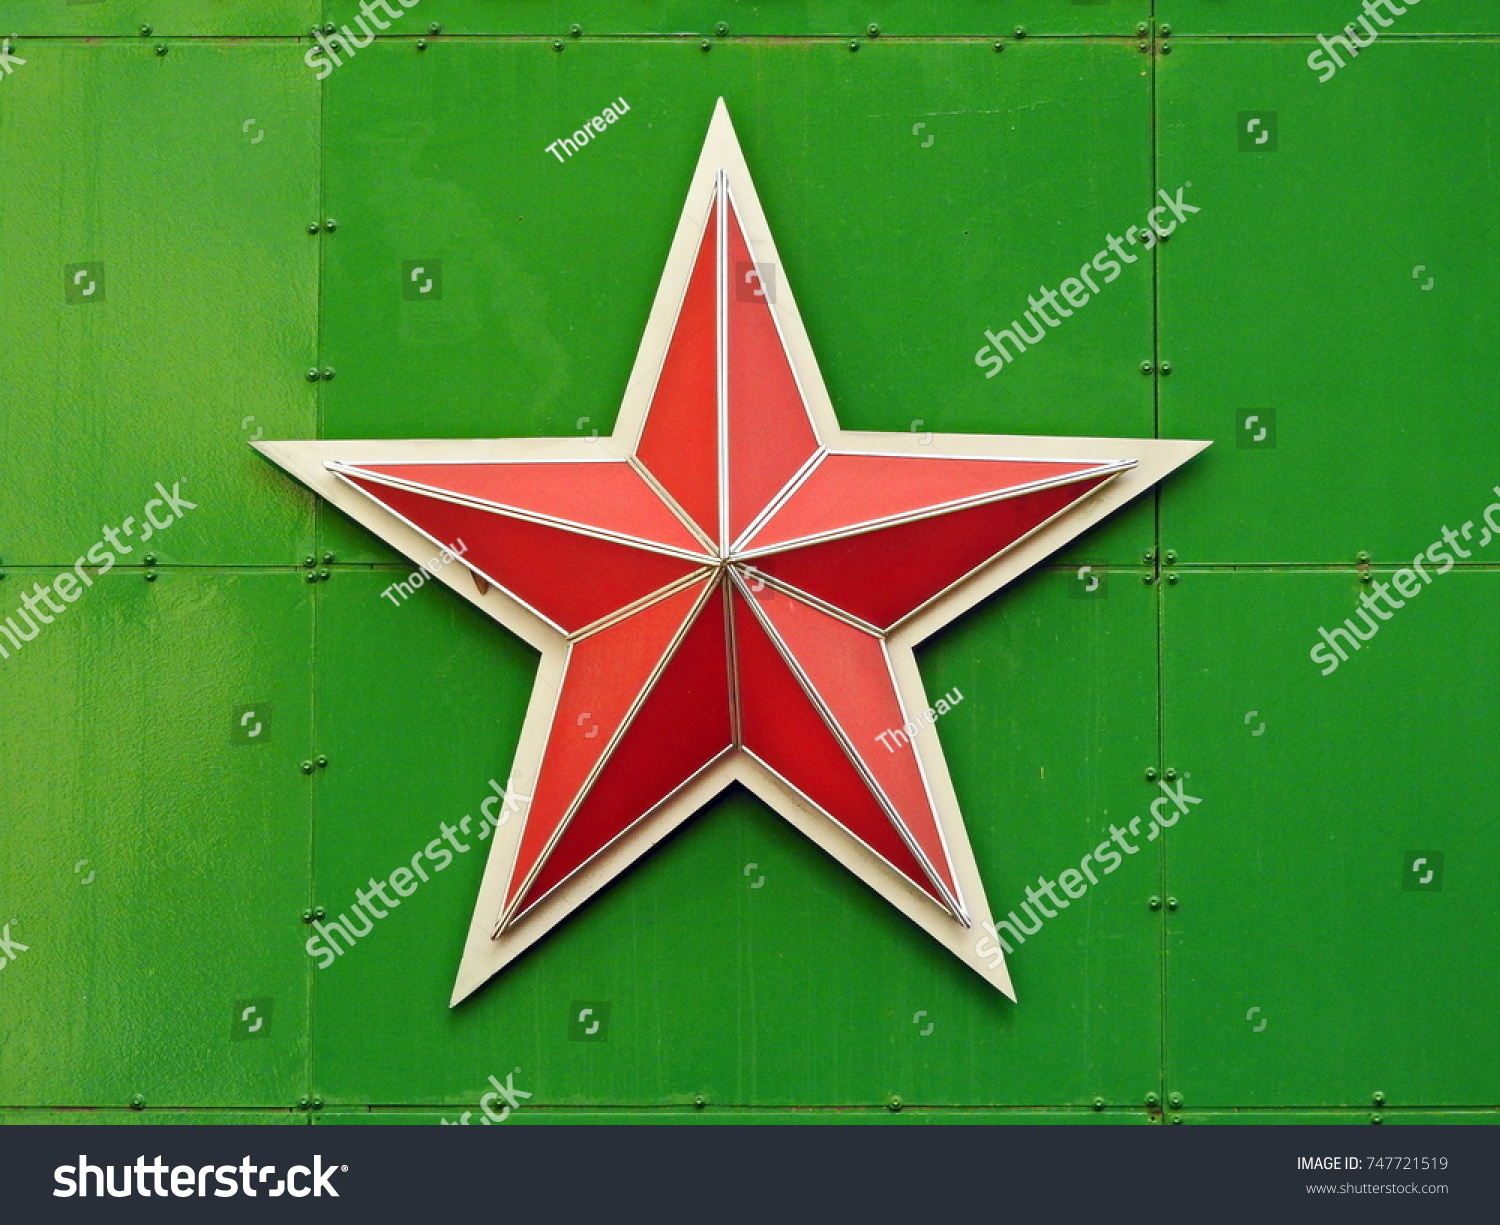 Geologic green and red star flights 